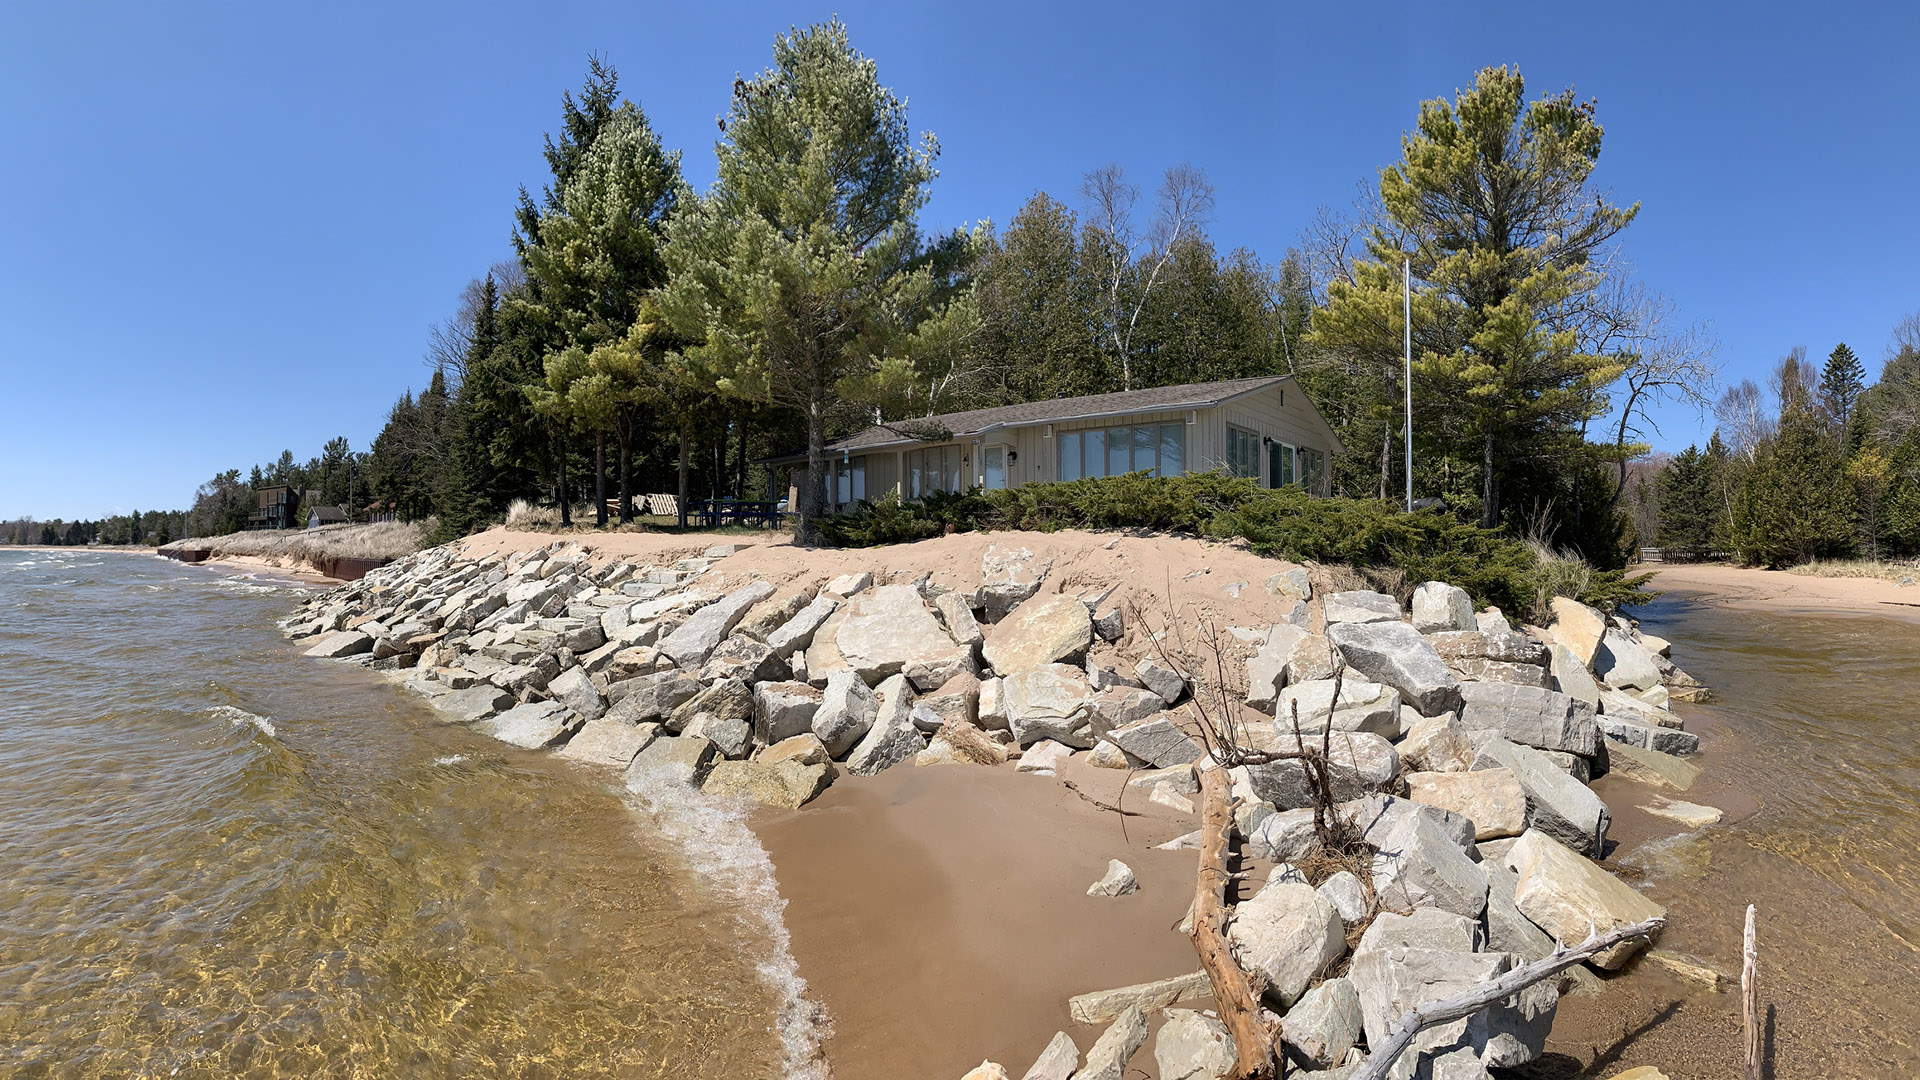 Boulders line a sandy shoreline in front of a house surrounded by trees.